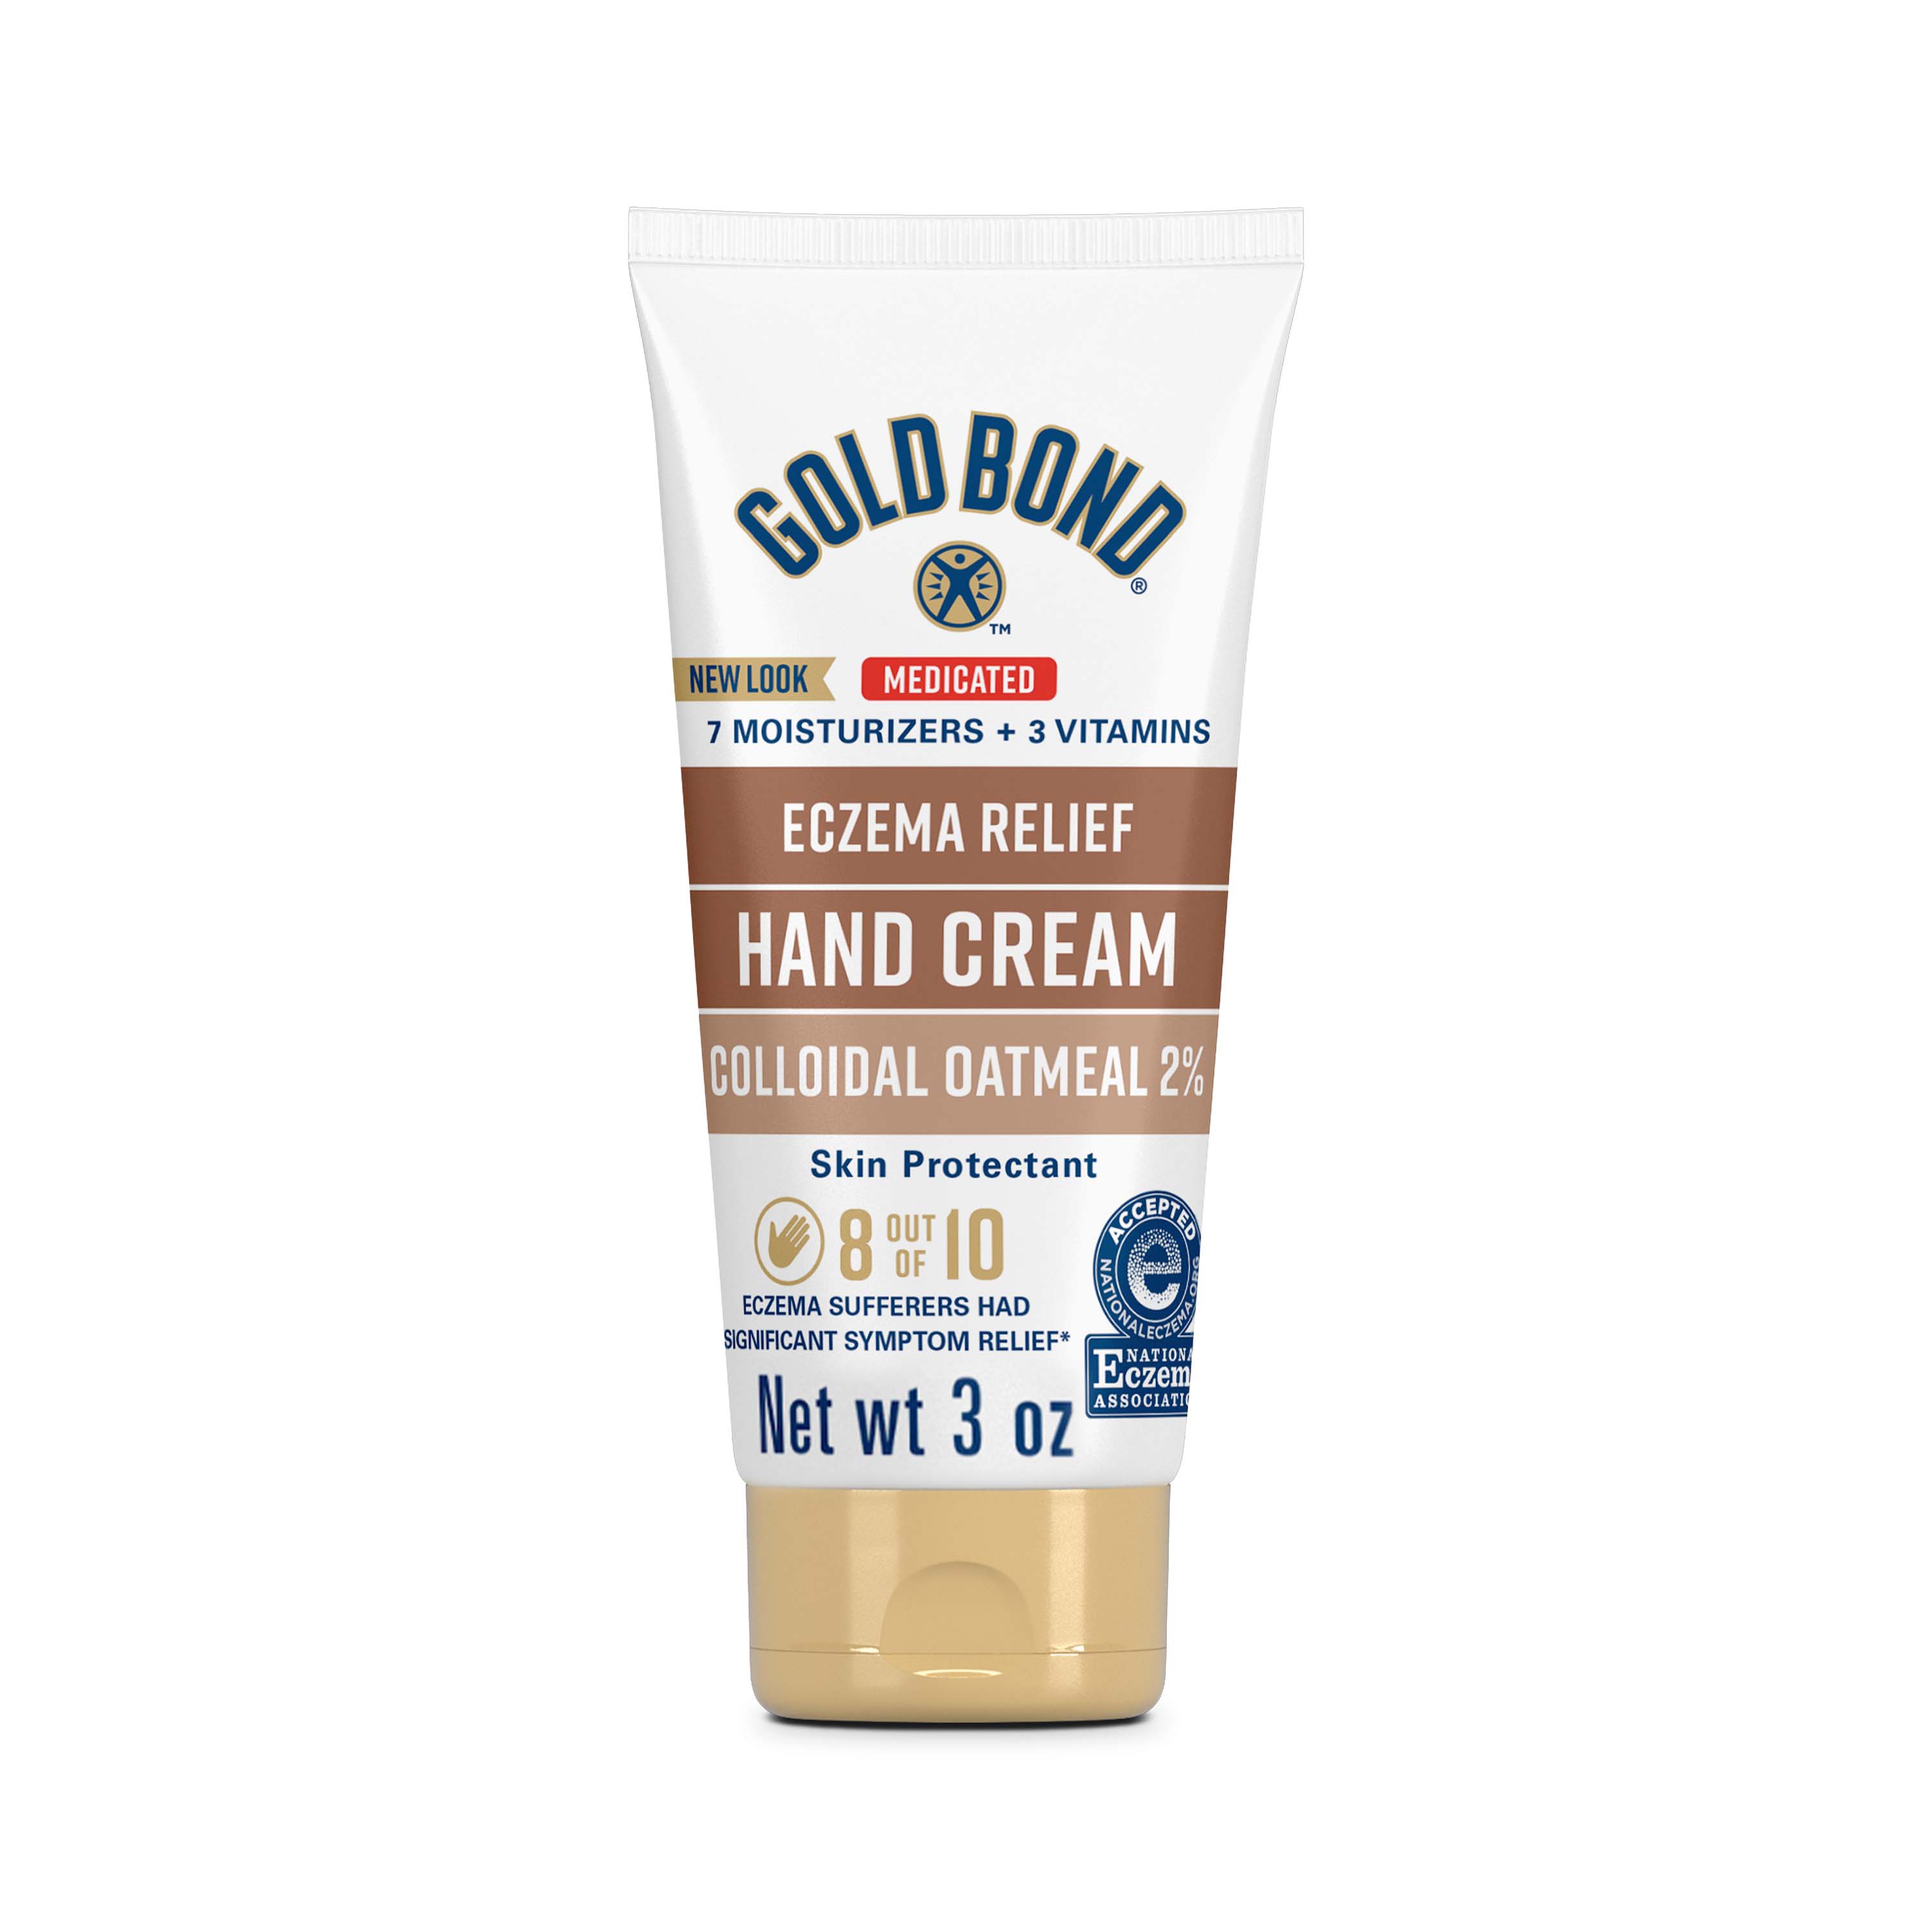 Gold Bond Ultimate Skin Protectant Hand Cream for Eczema Relief, 2% Colloidal Oatmeal